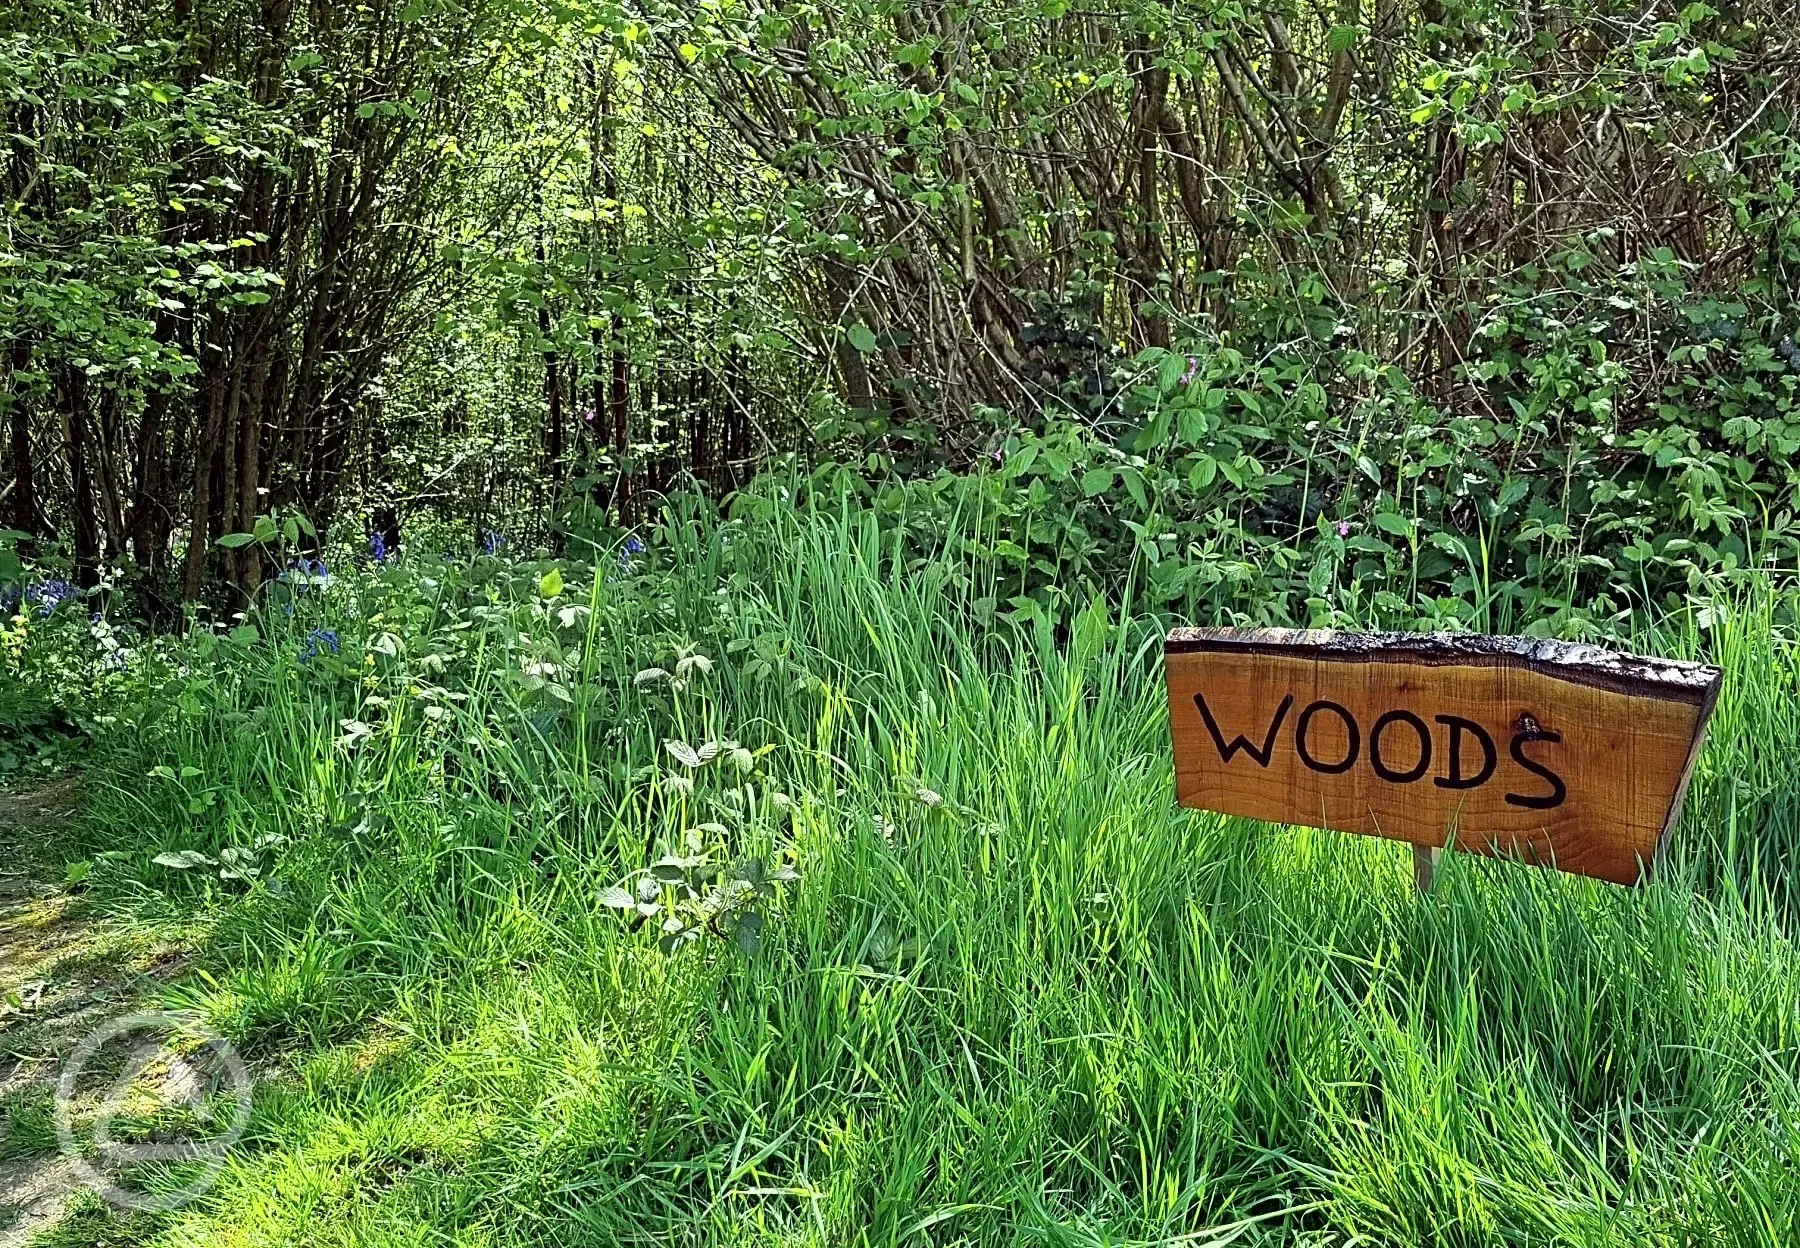 Entrance to the woodland walk